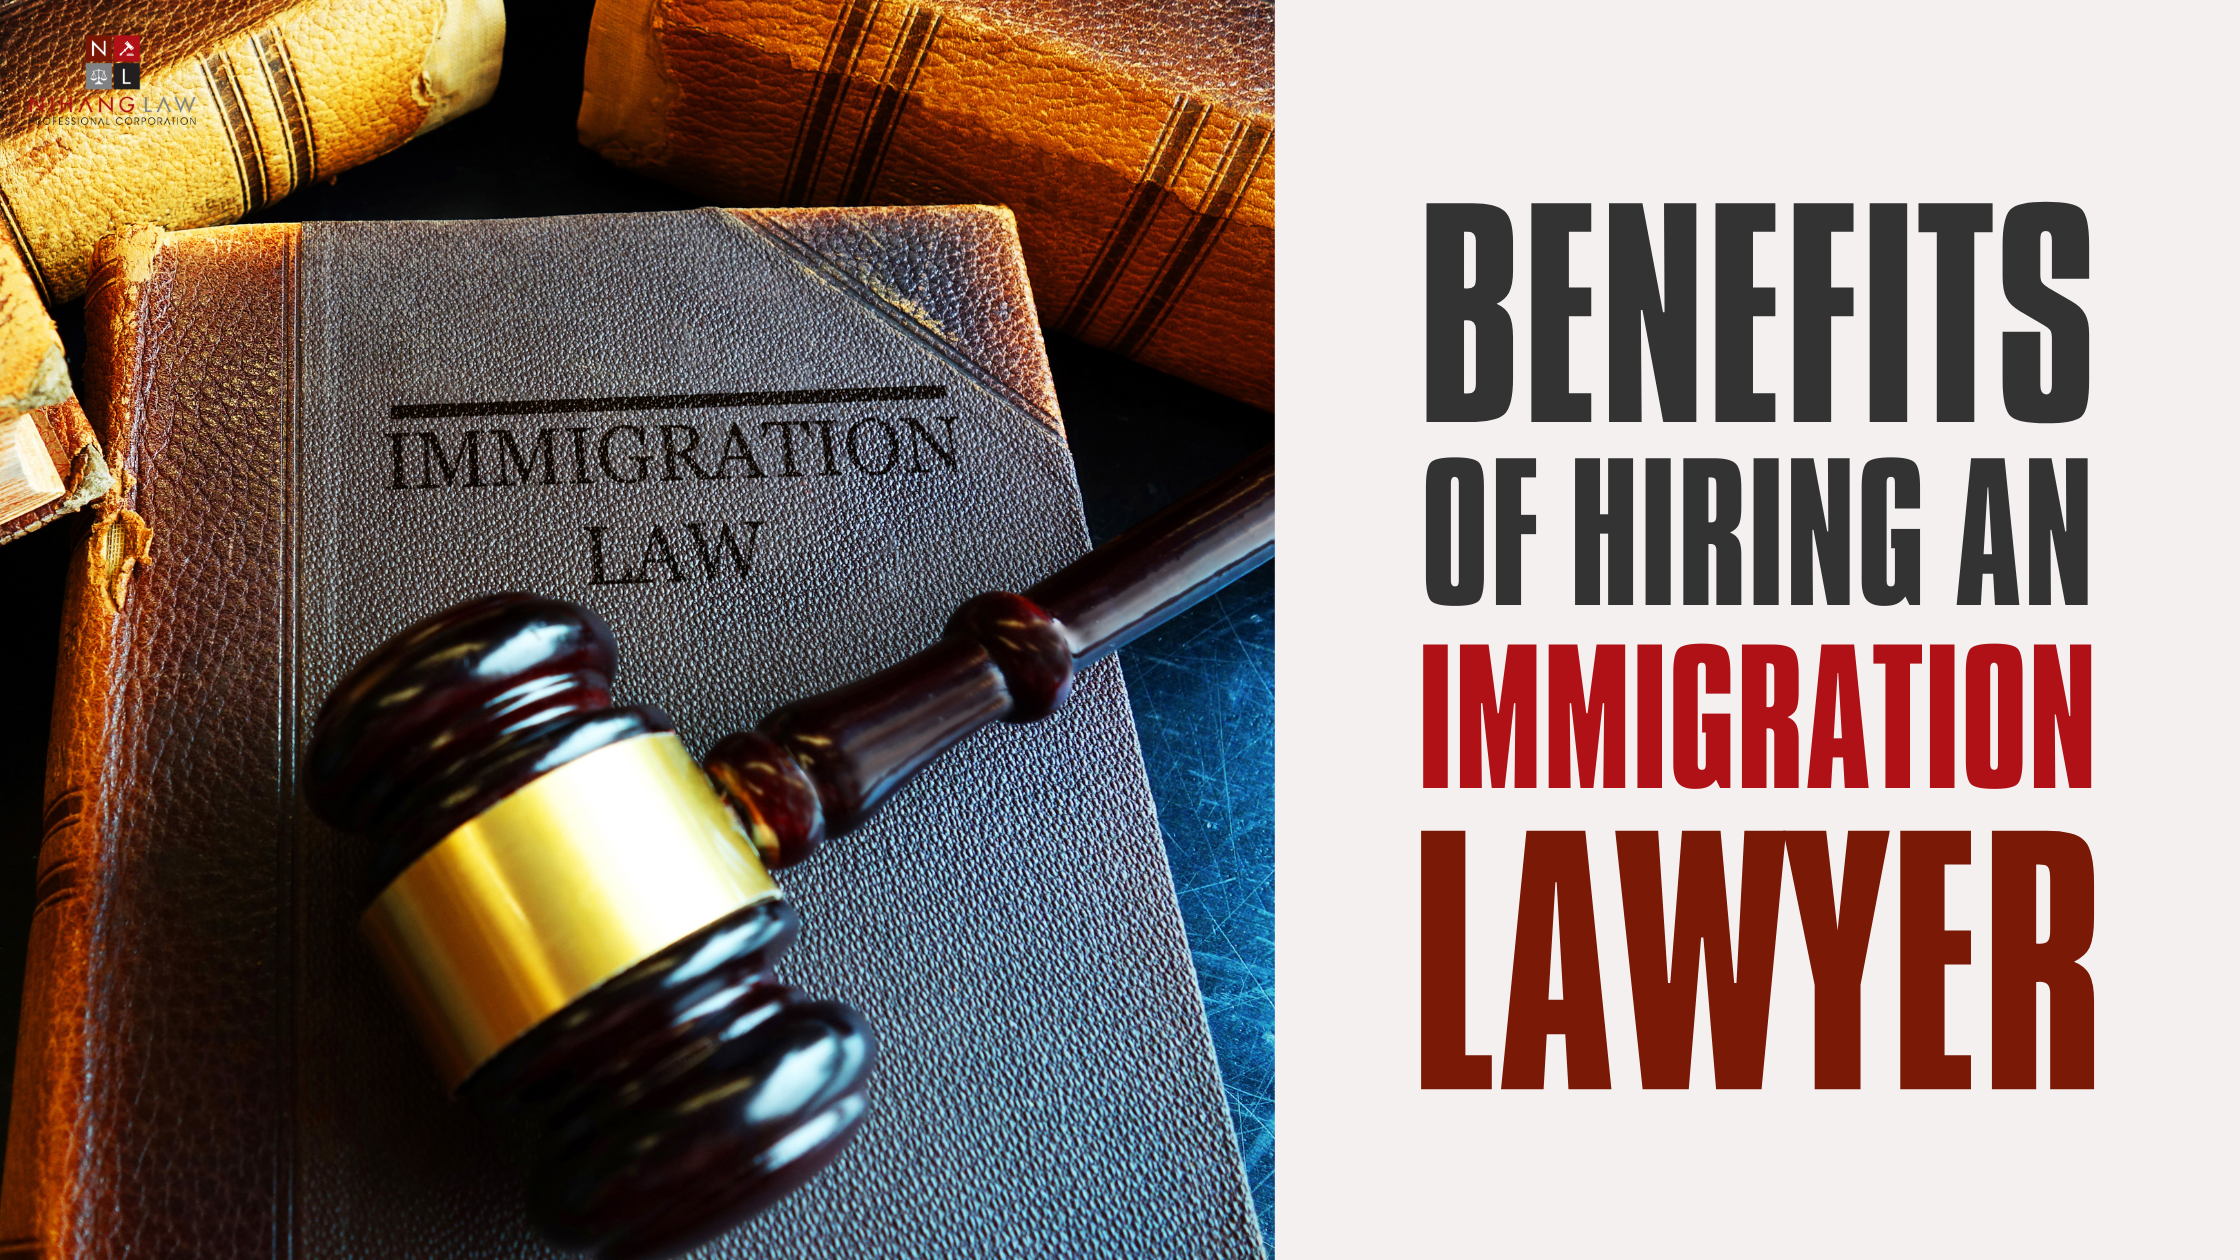 Benefits of hiring an immigration lawyer